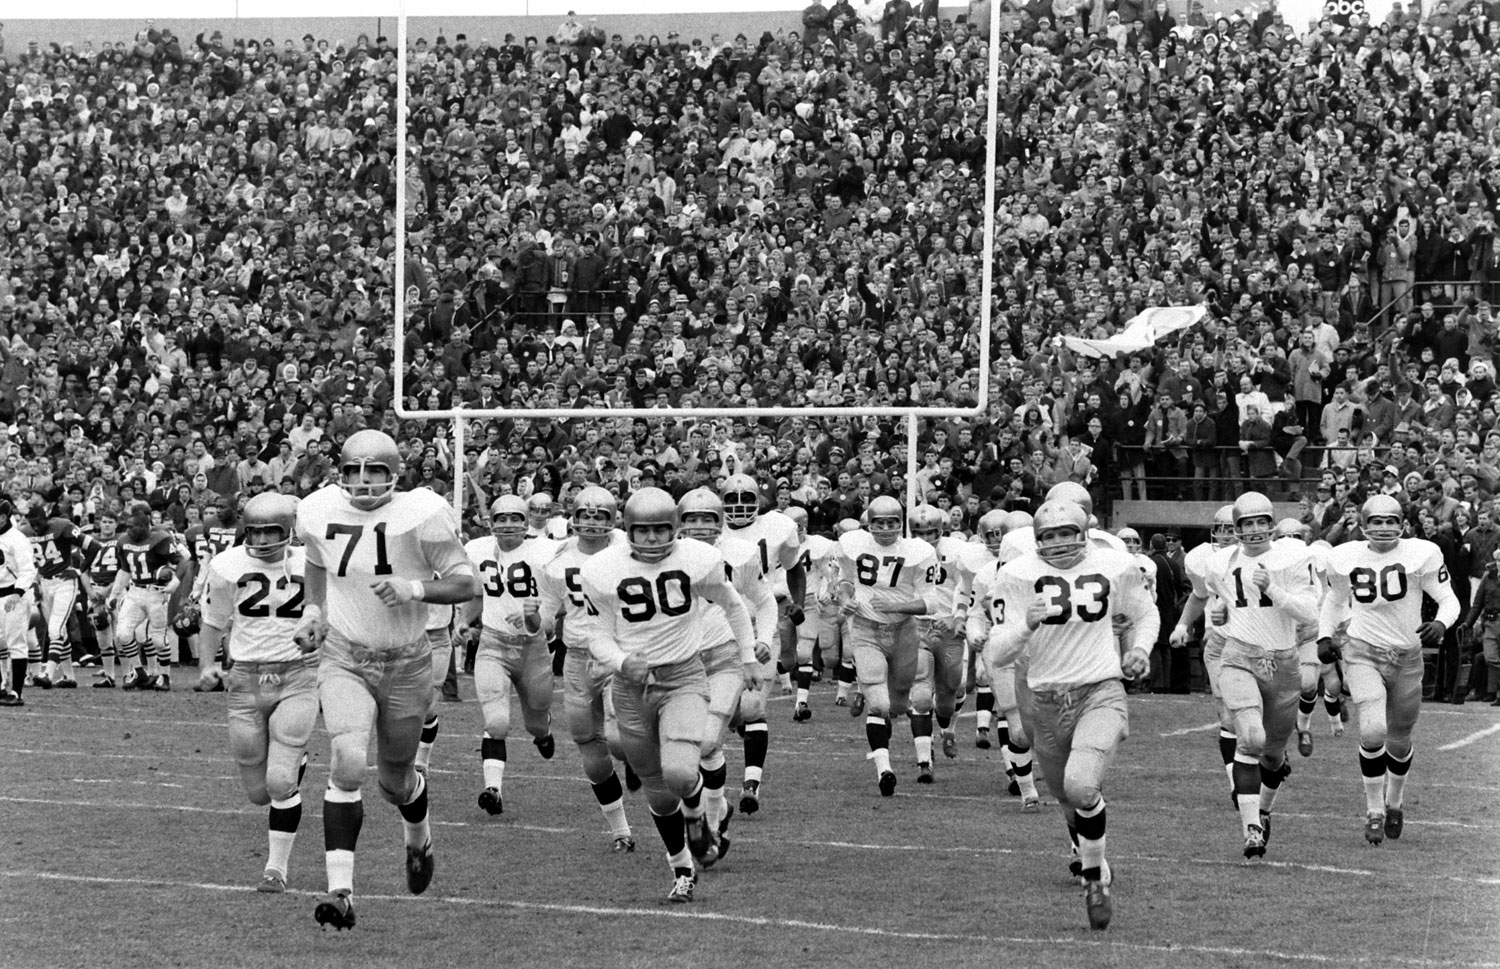 The Fighting Irish take the field before the 1966 "Game of the Century" against Michigan State, November 1966.